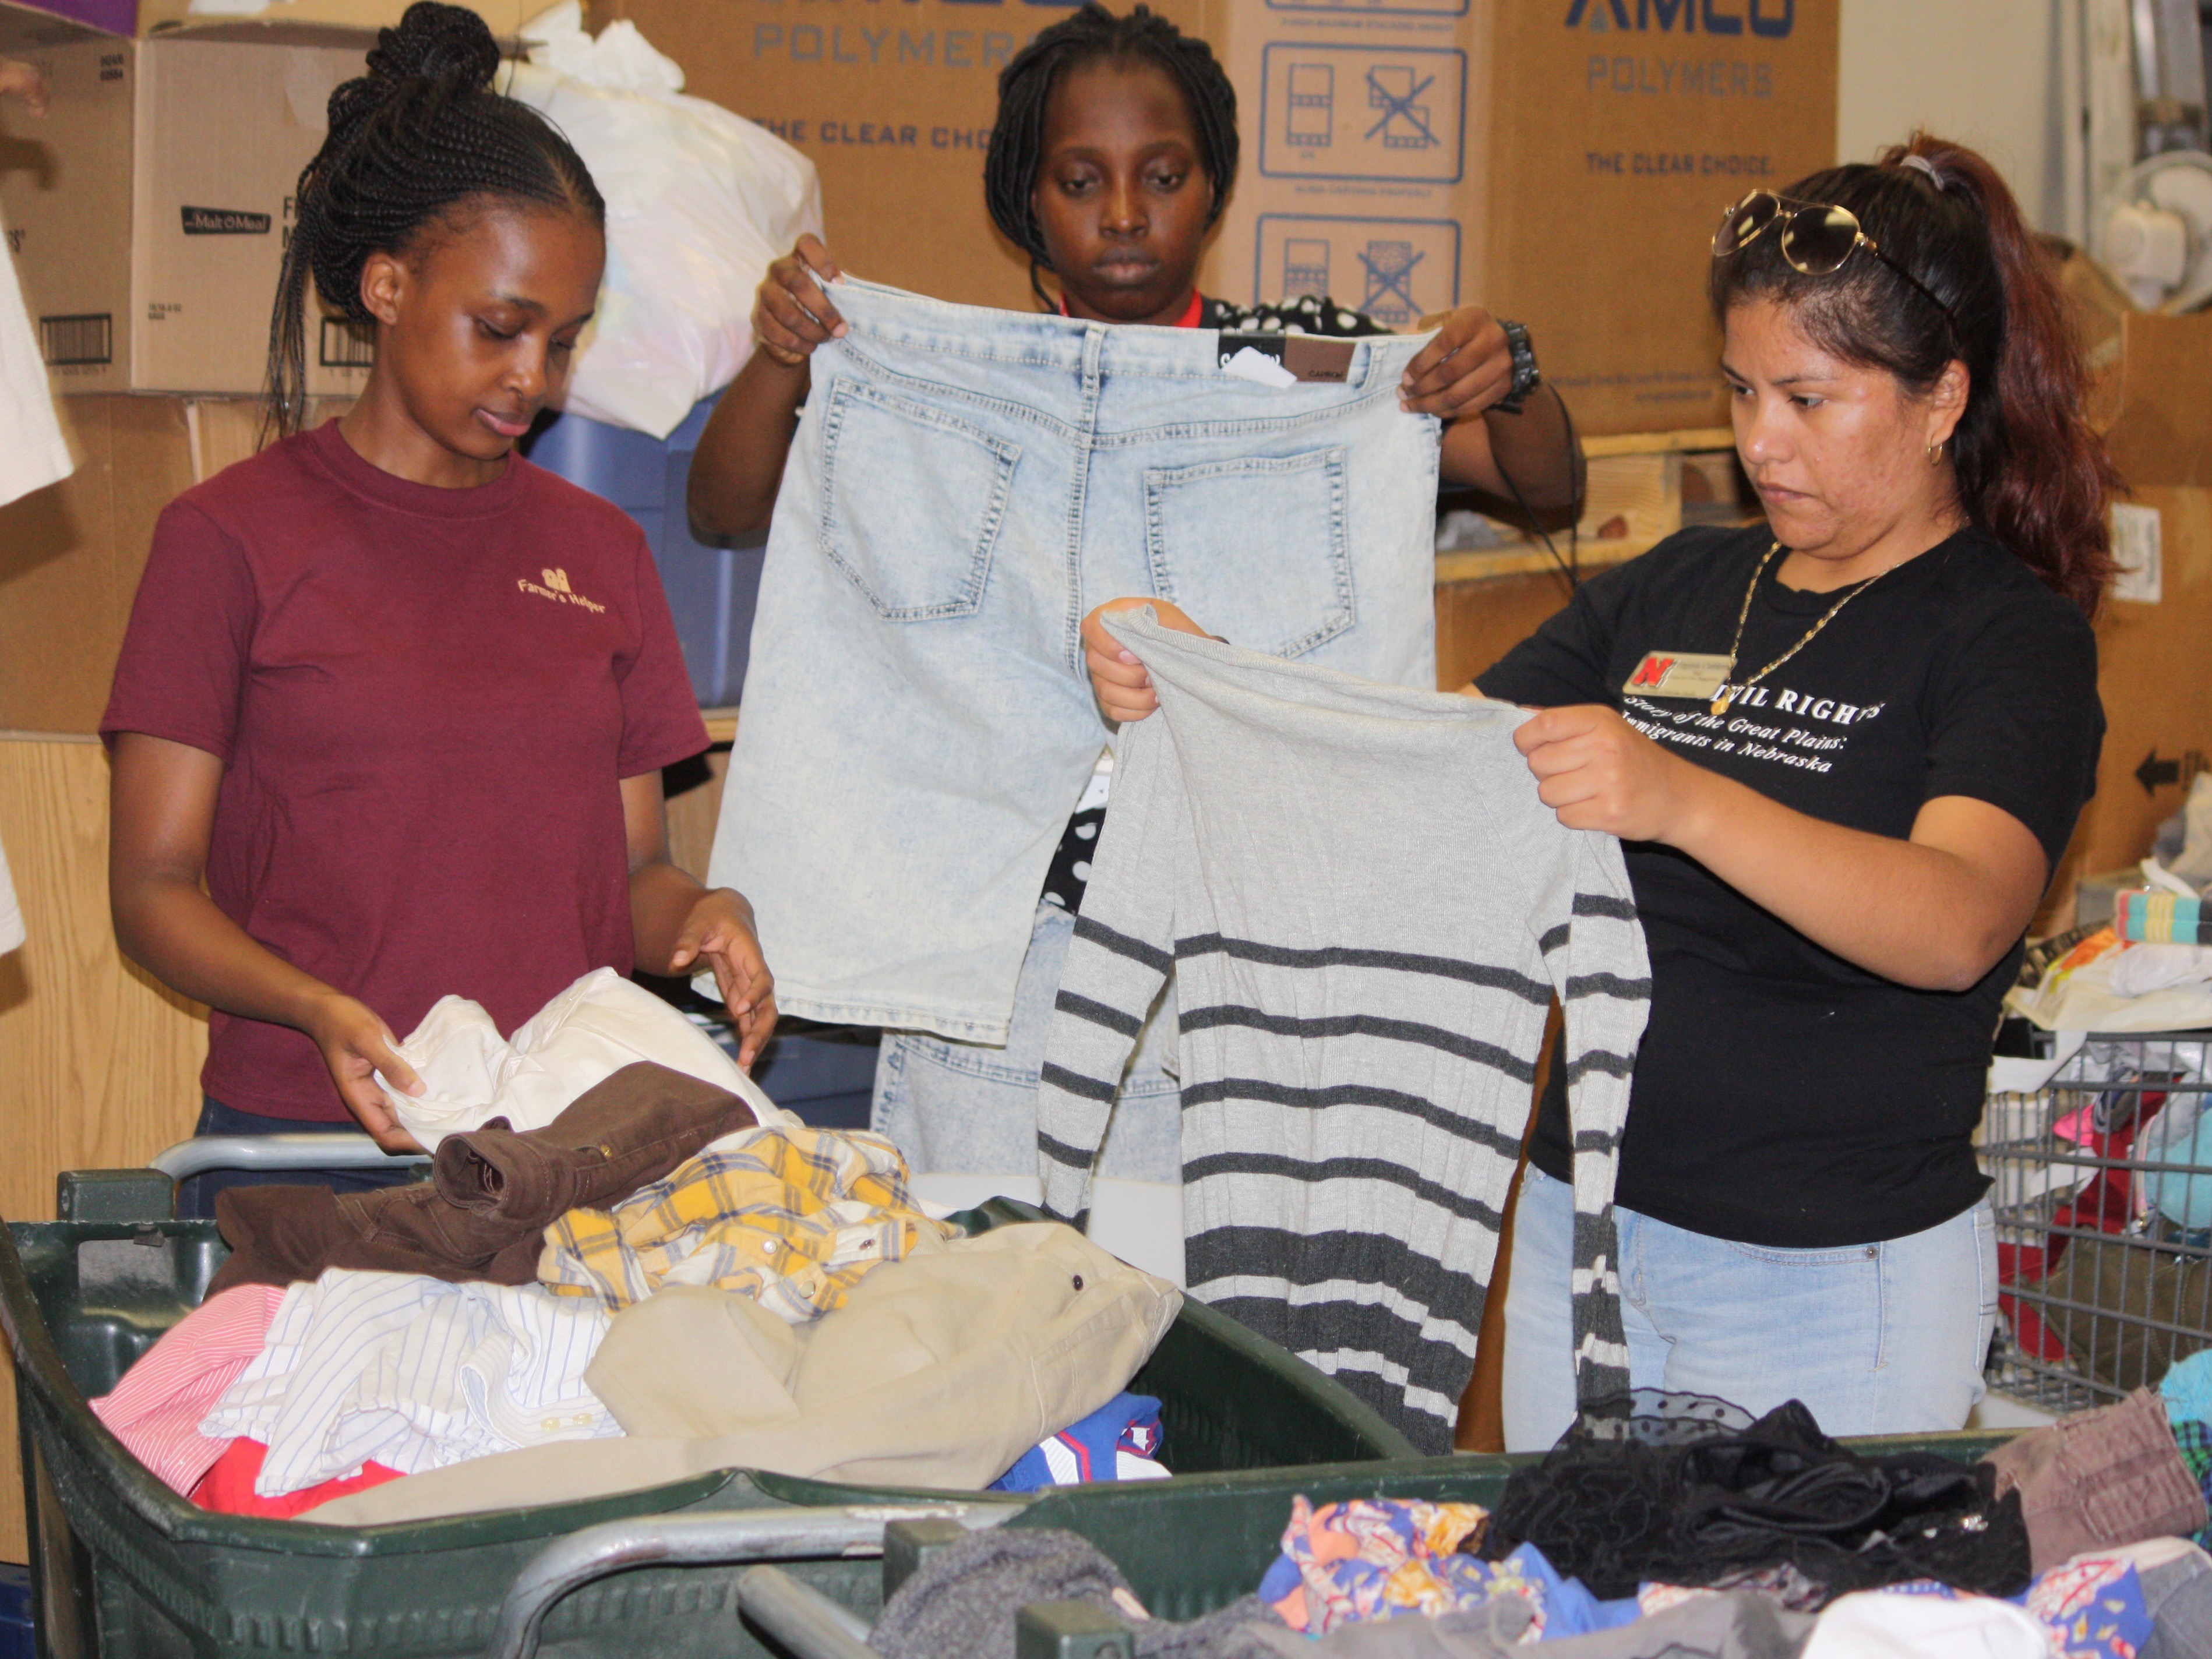 Participants in the Mandela Fellows program sort donations to the Homeless Prevention Center.